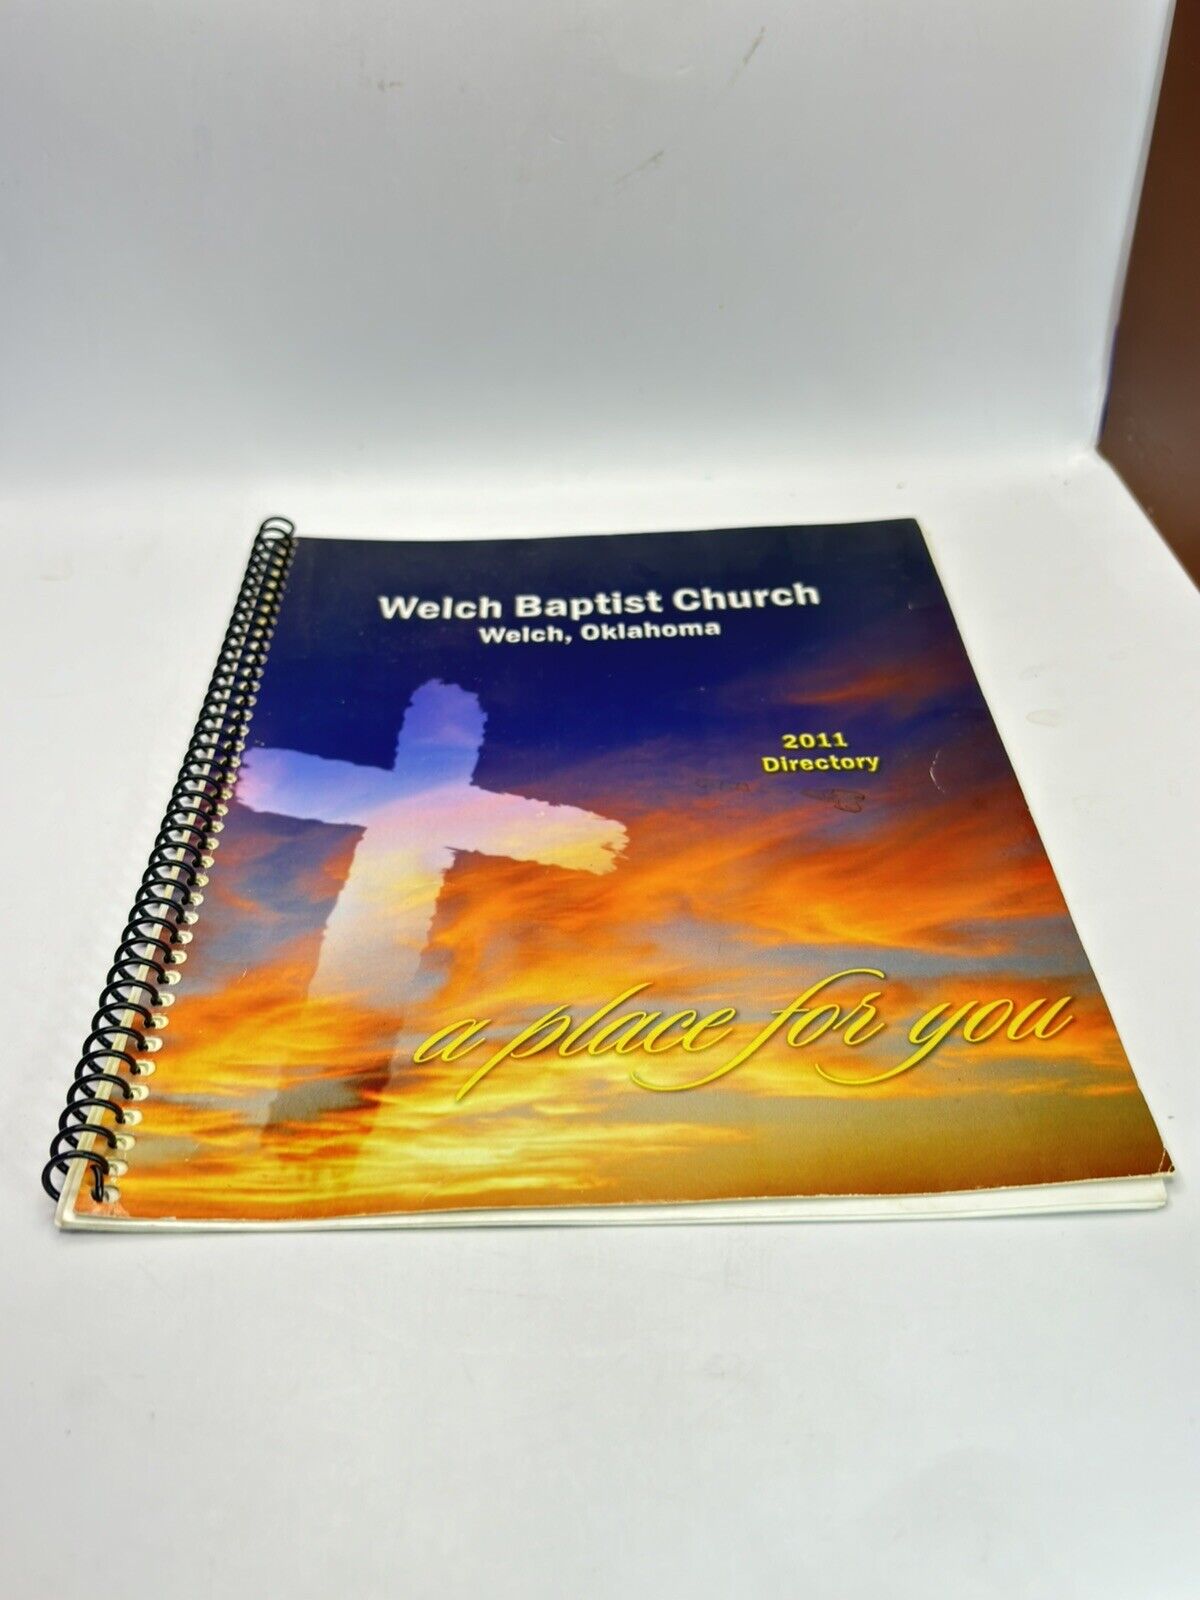 Welch Baptist Church 2011 Directory Photos Of Congregation | Welch, Oklahoma